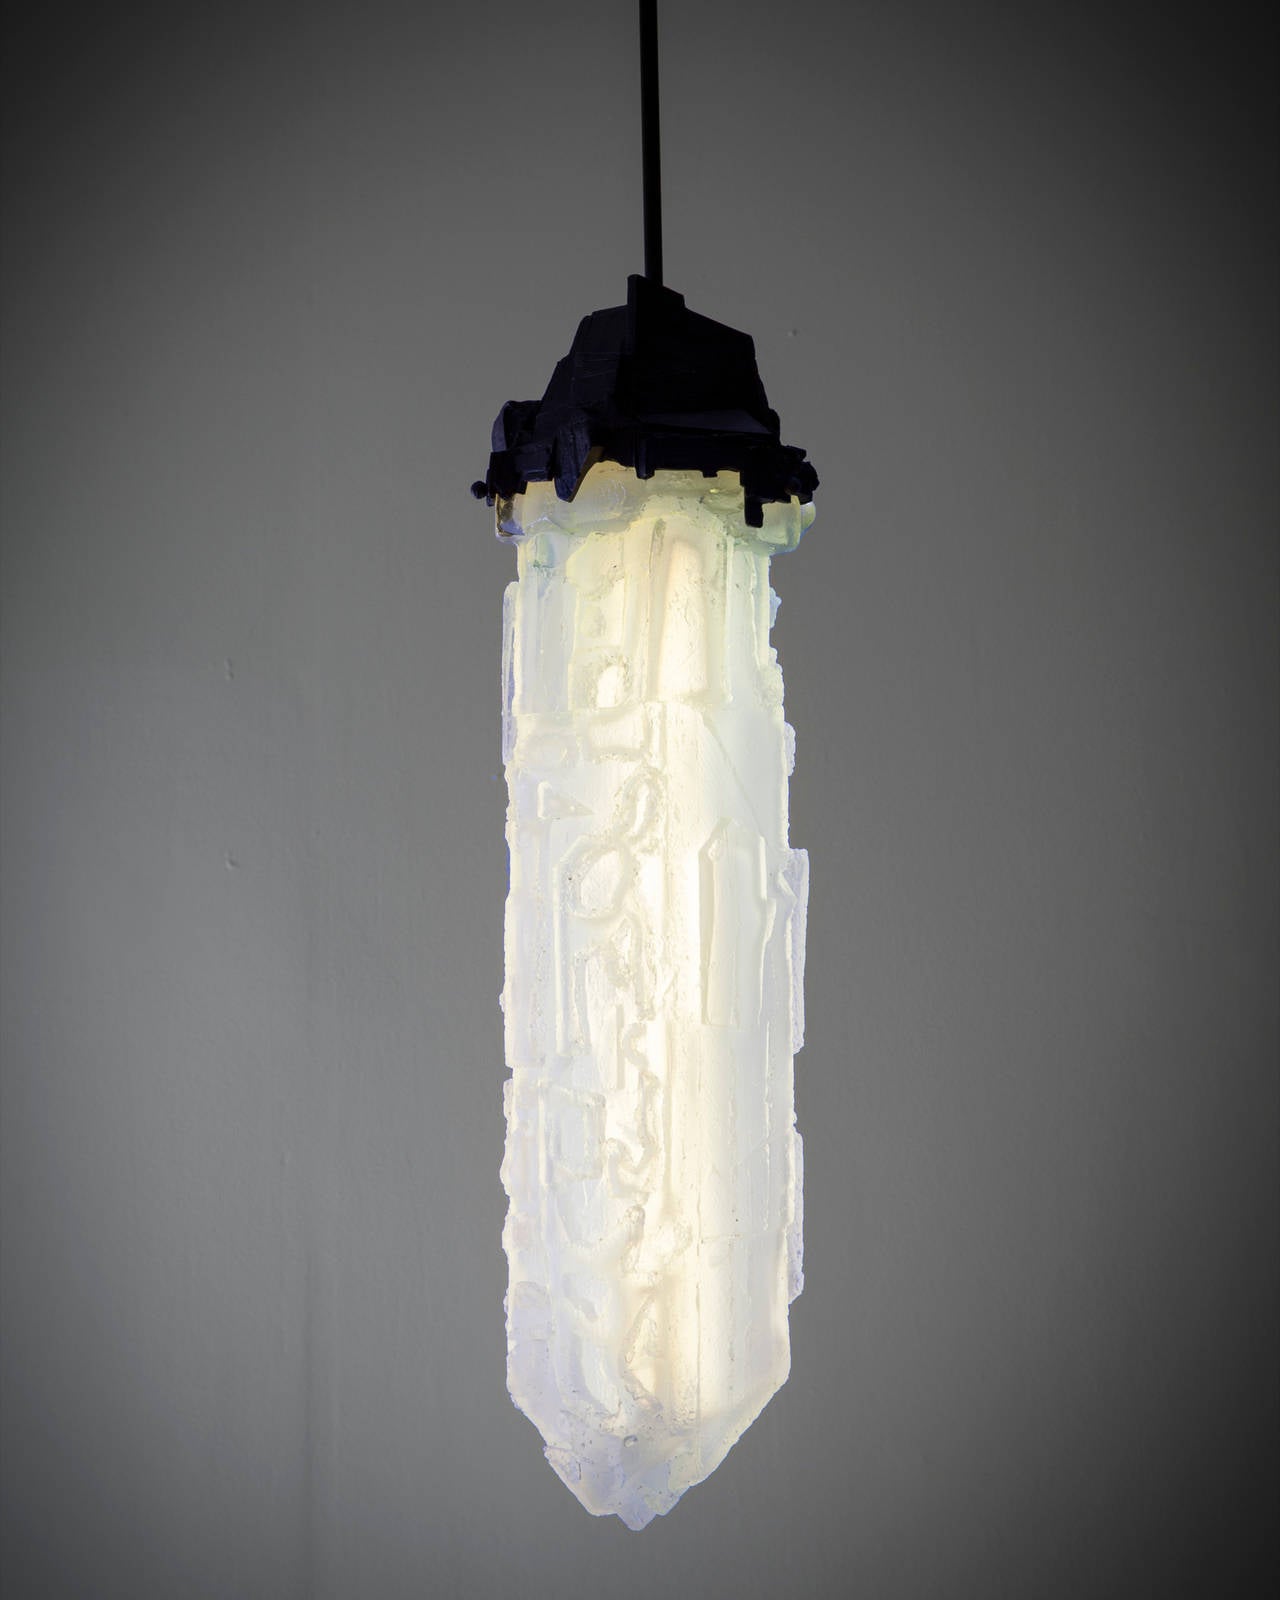 HL1282.

Unique assemblage pendant lamp in uranium yellow and opaline handblown, cut and polished glass. Designed and made by Thaddeus Wolfe, USA, 2014.